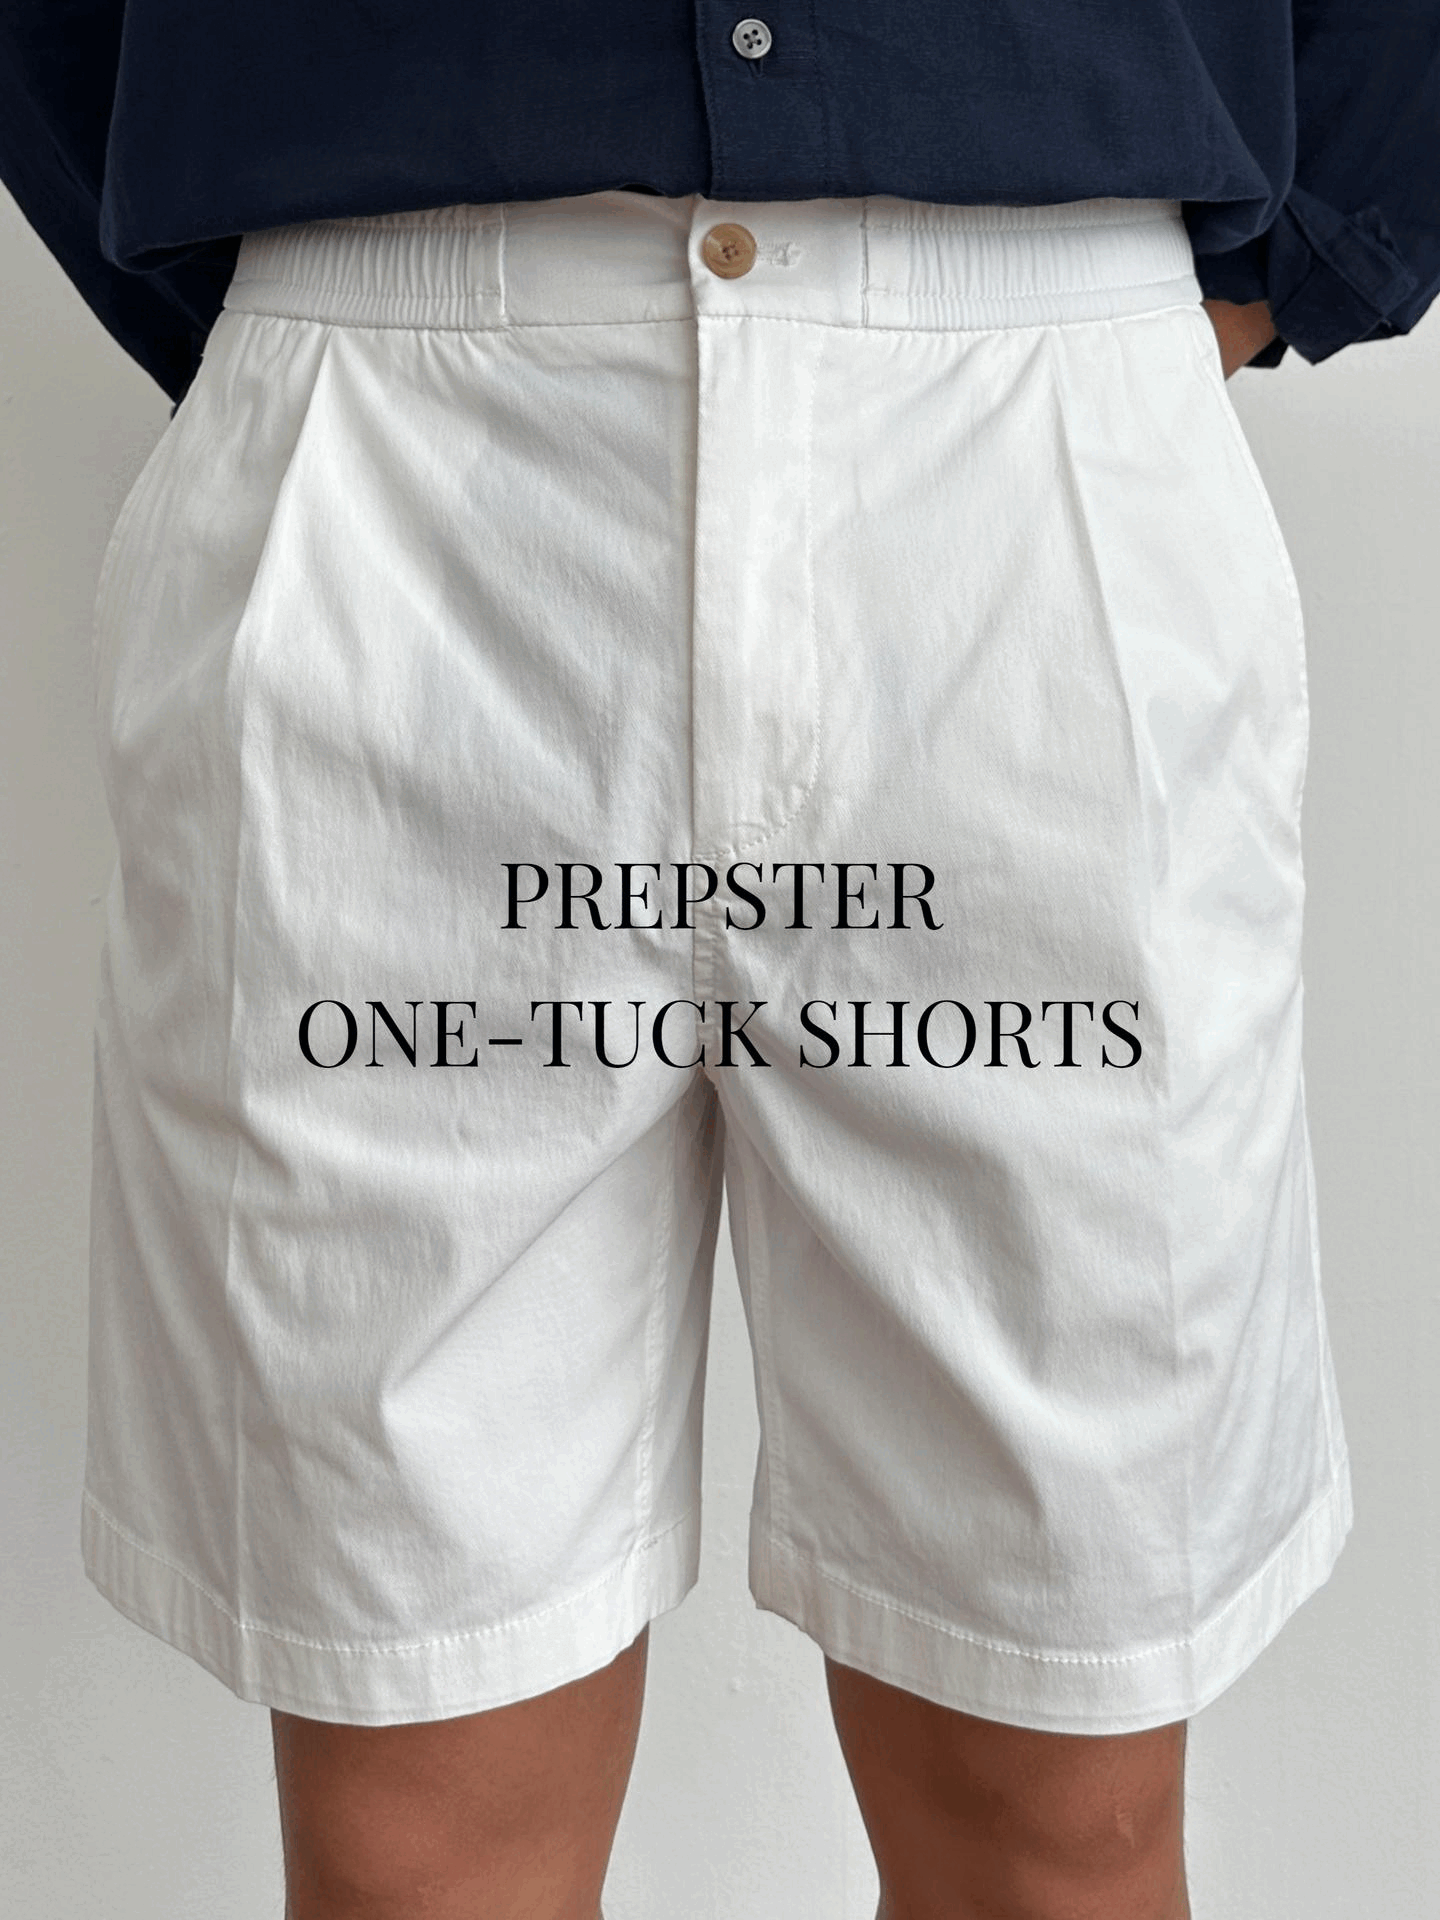 Prepster one-tuck shorts